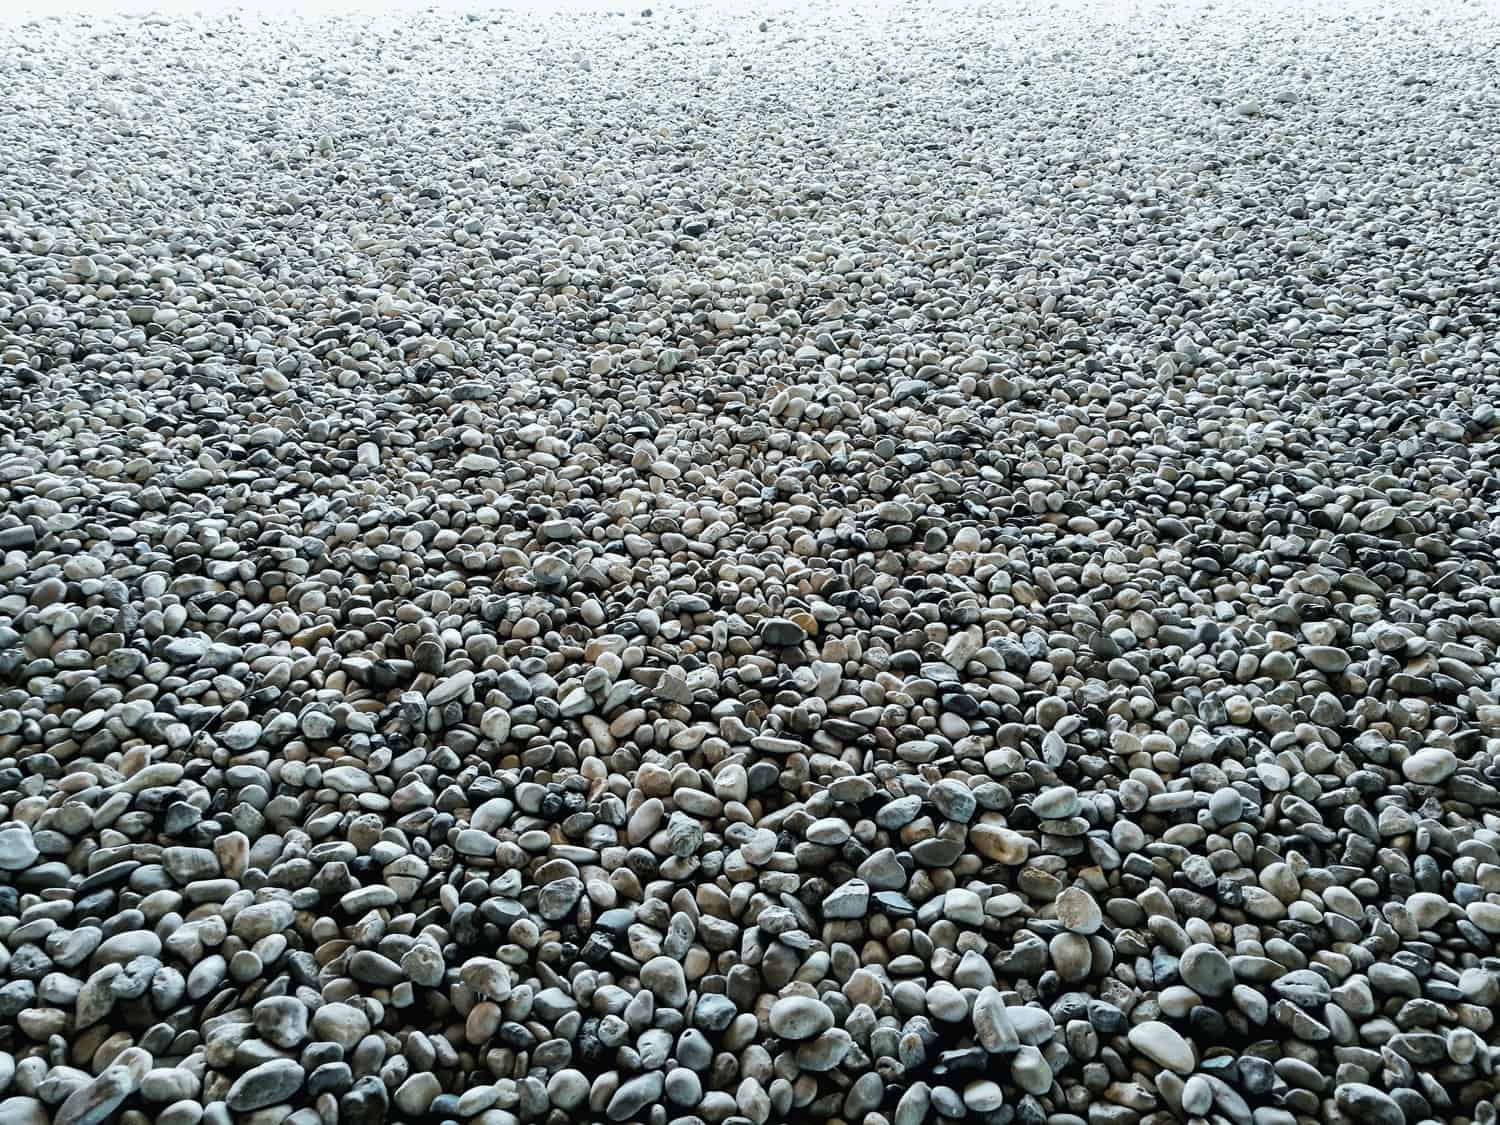 gravel on ground construction material for reference. ground and sub base layer of floor. river stone smooth curve edge stone.
